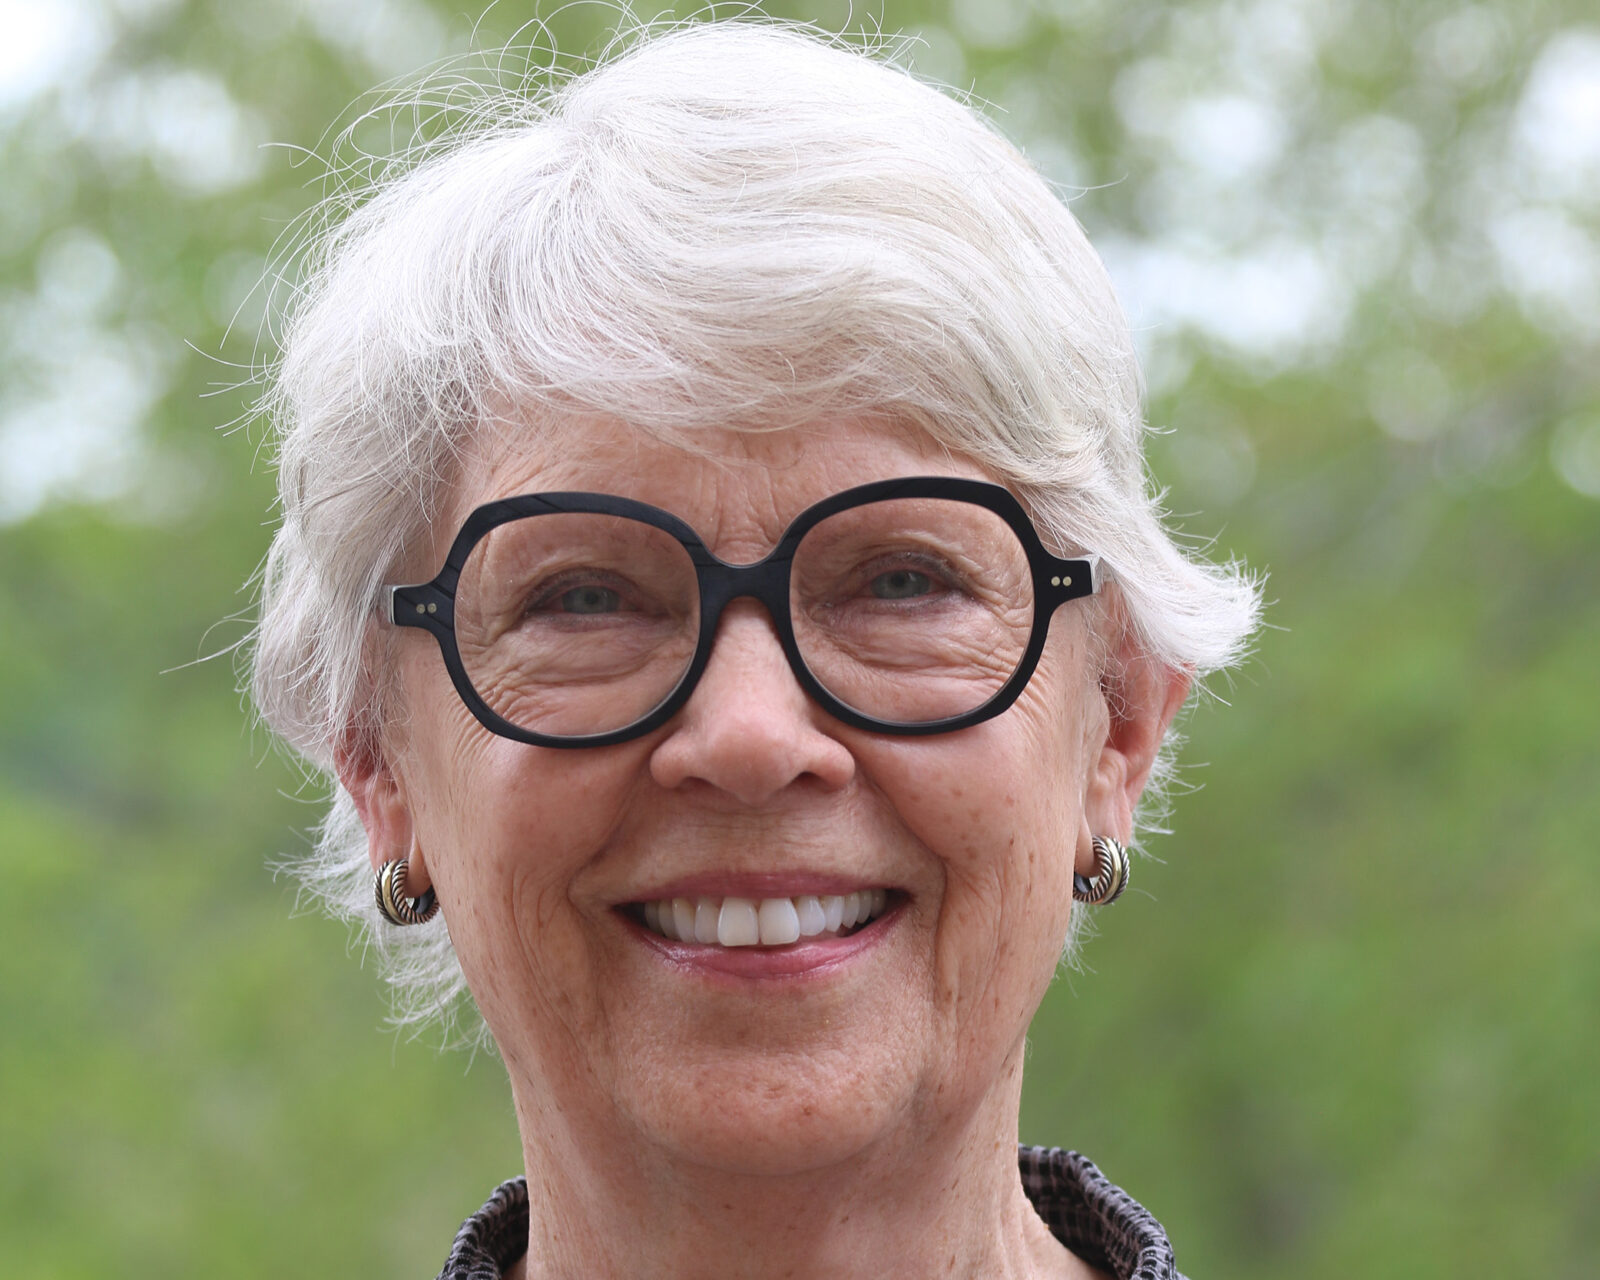 Woman with short white hair and glasses smiling into the camera.